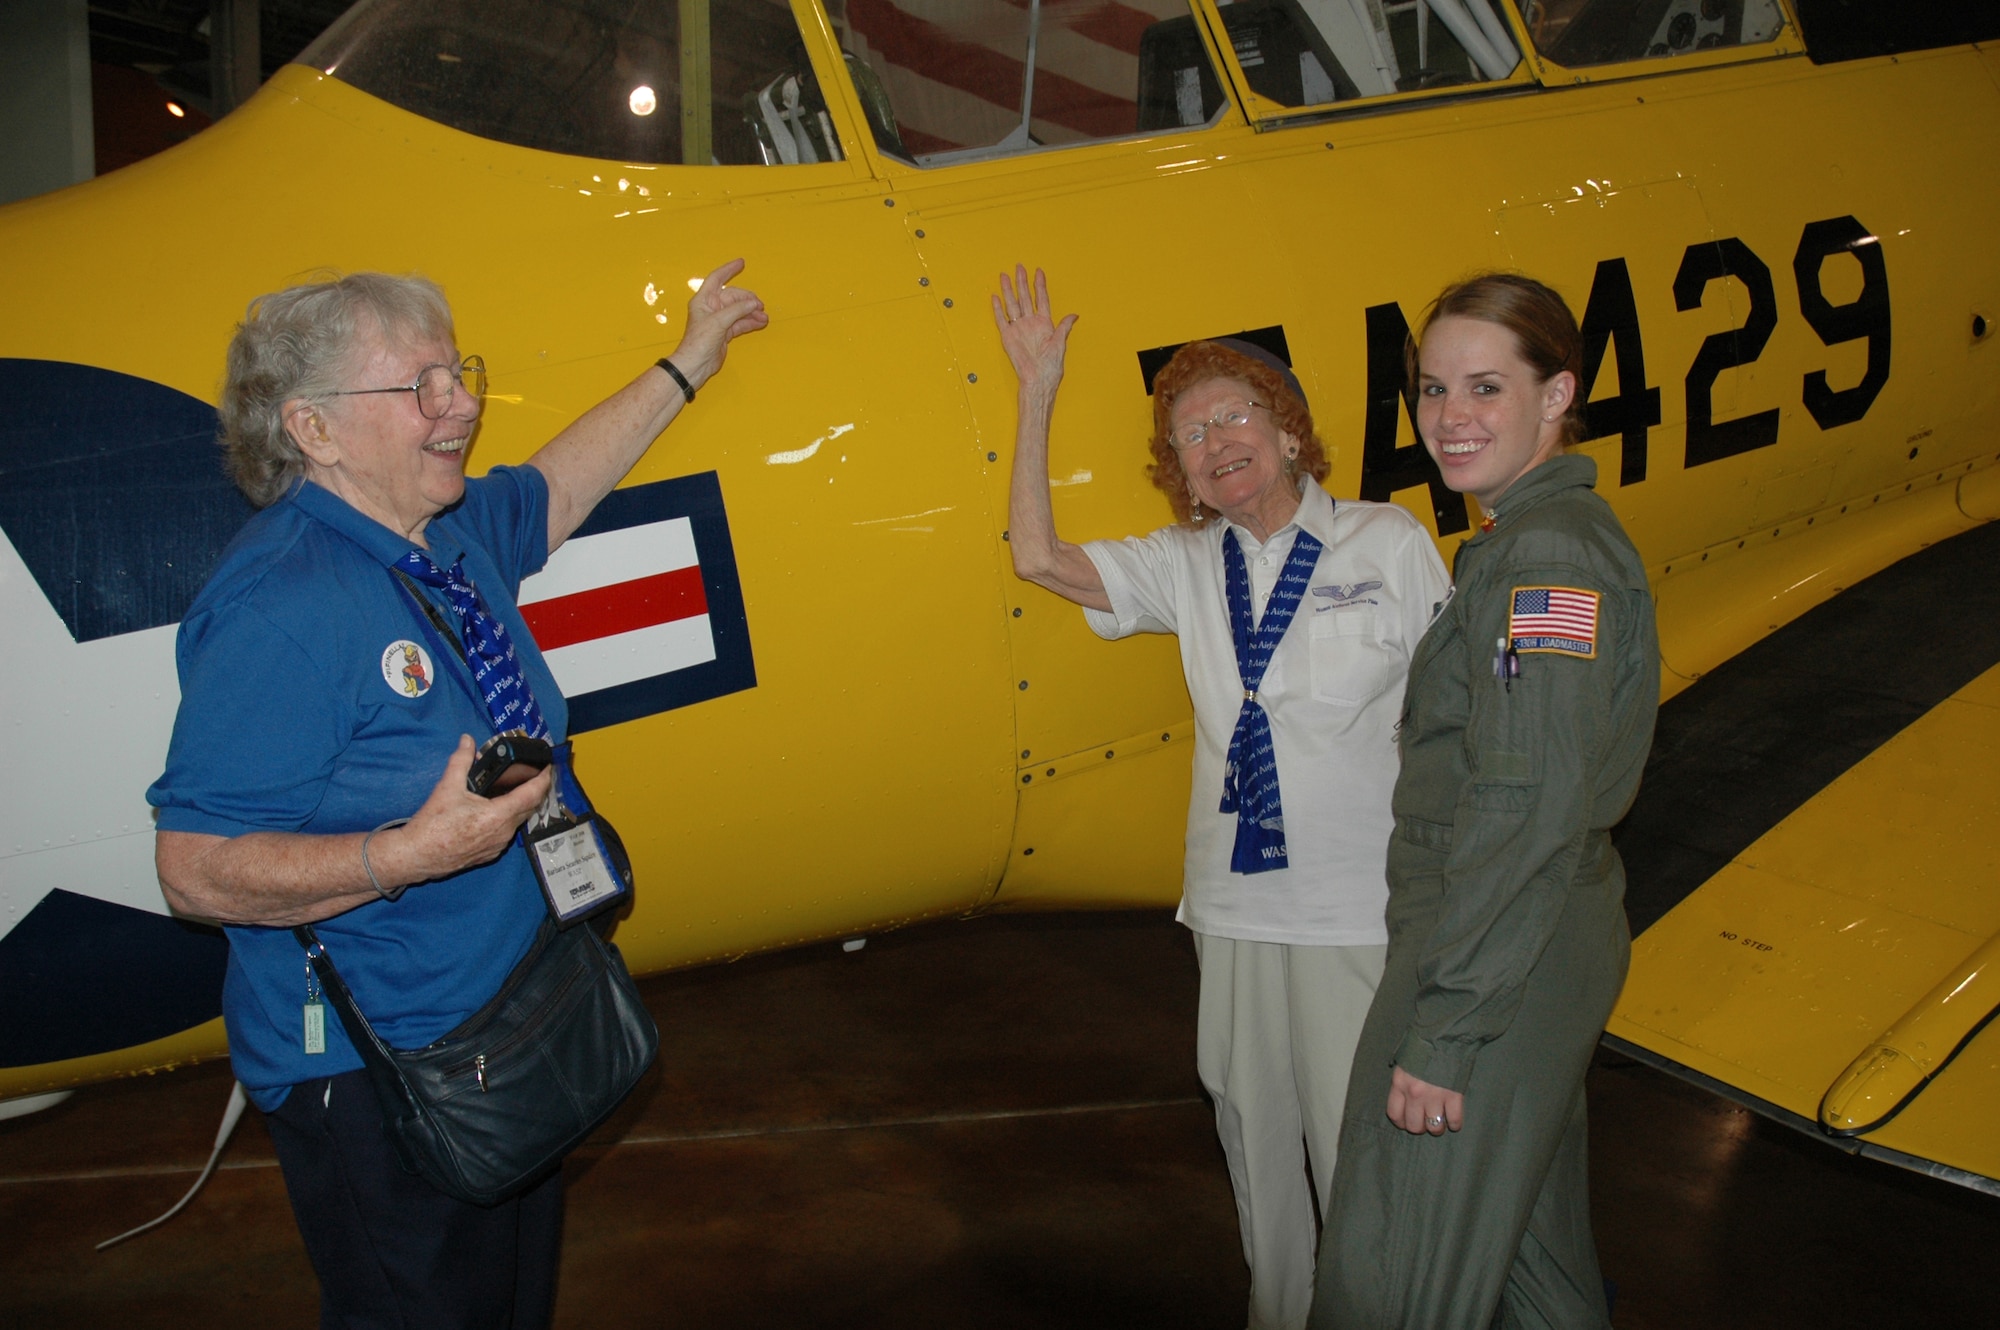 Former WASP members, Barbara Squires, left, and R. Betty "Wall" Strohfus discuss the attributes of a T-6 Texan with Air Force Reservist Senior Airman Leigha Samples, a C-130 Hercules loadmaster with Maxwell AFB, Ala.'s 357th Airlift Squadron, 908th Airlift Wing. (U.S. Air Force Photo by Staff Sgt. Jay Ponder